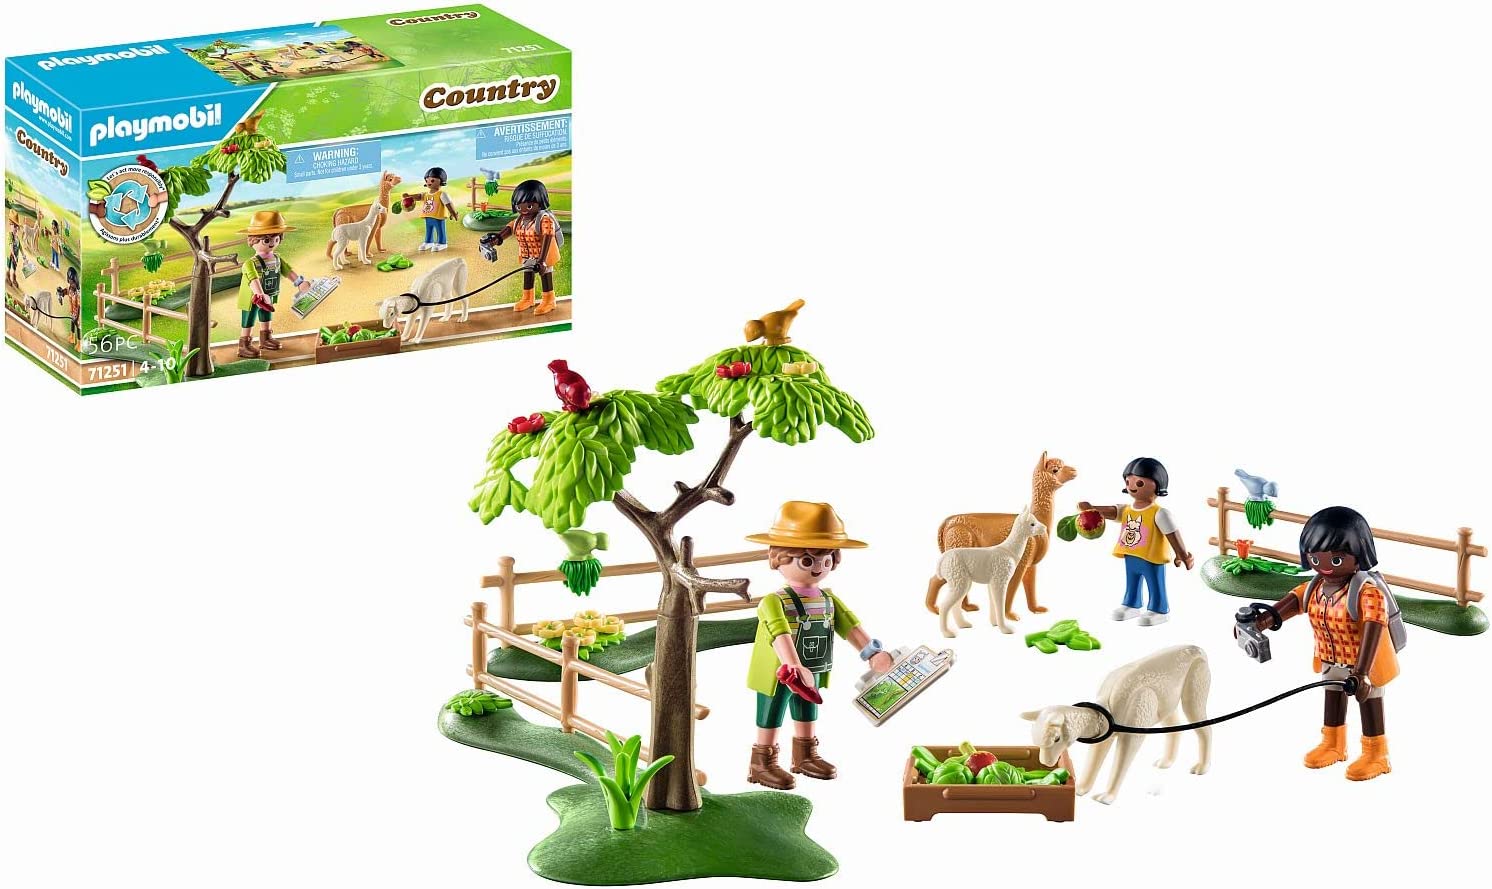 Playmobil Country 71251 Alpaca Hiking Animals for Organic Farm Sustainable Toy for Children from 4 Years